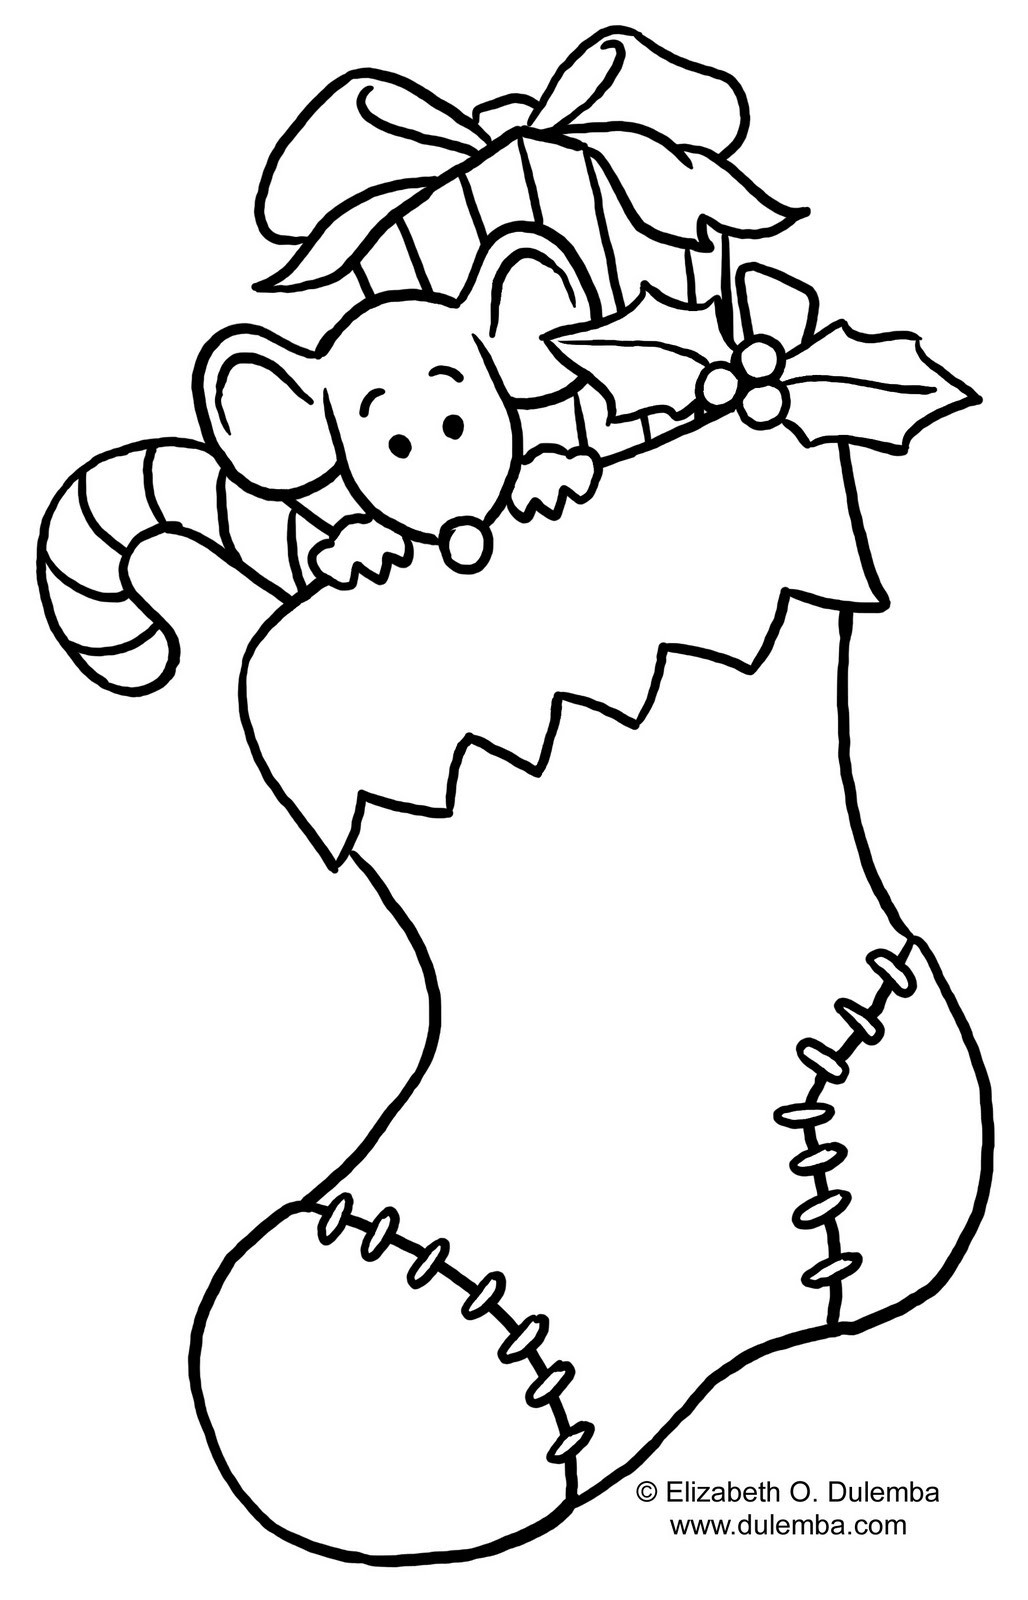 Coloring Pages For Christmas Free Printable
 Christmas Coloring Pages 2010